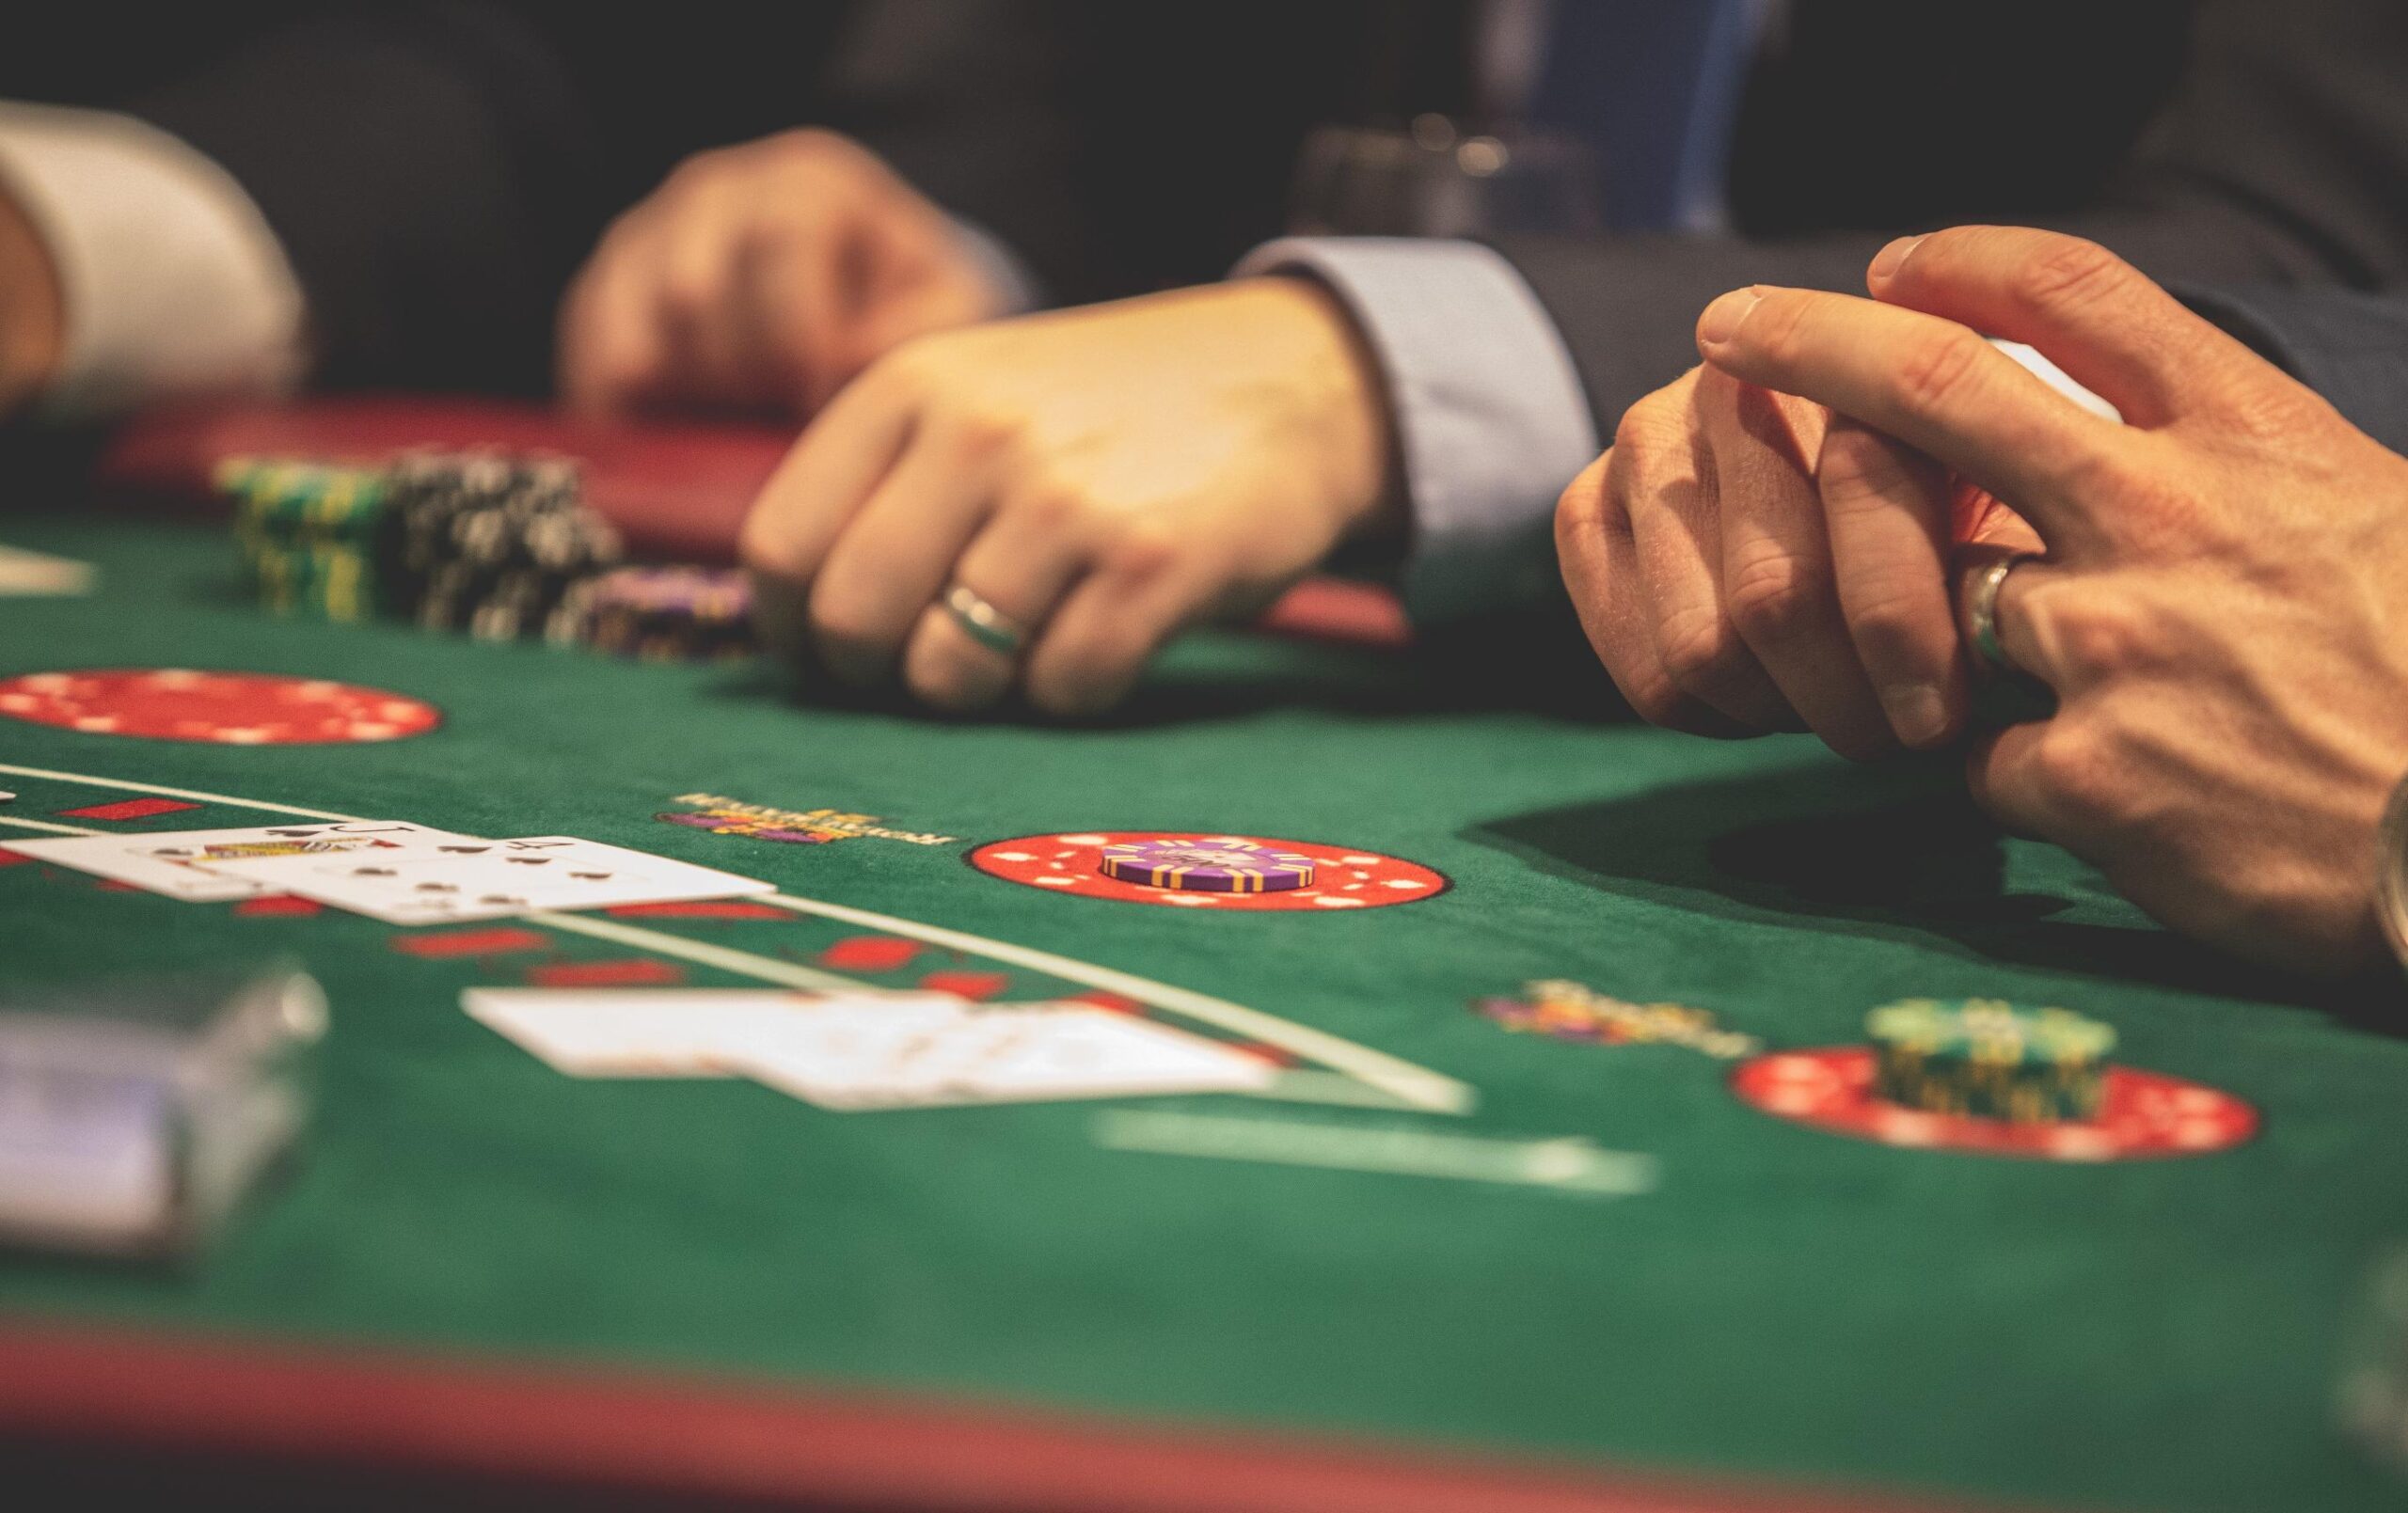 What are the top 10 strategies for managing your emotions and maintaining a healthy mindset while gambling?